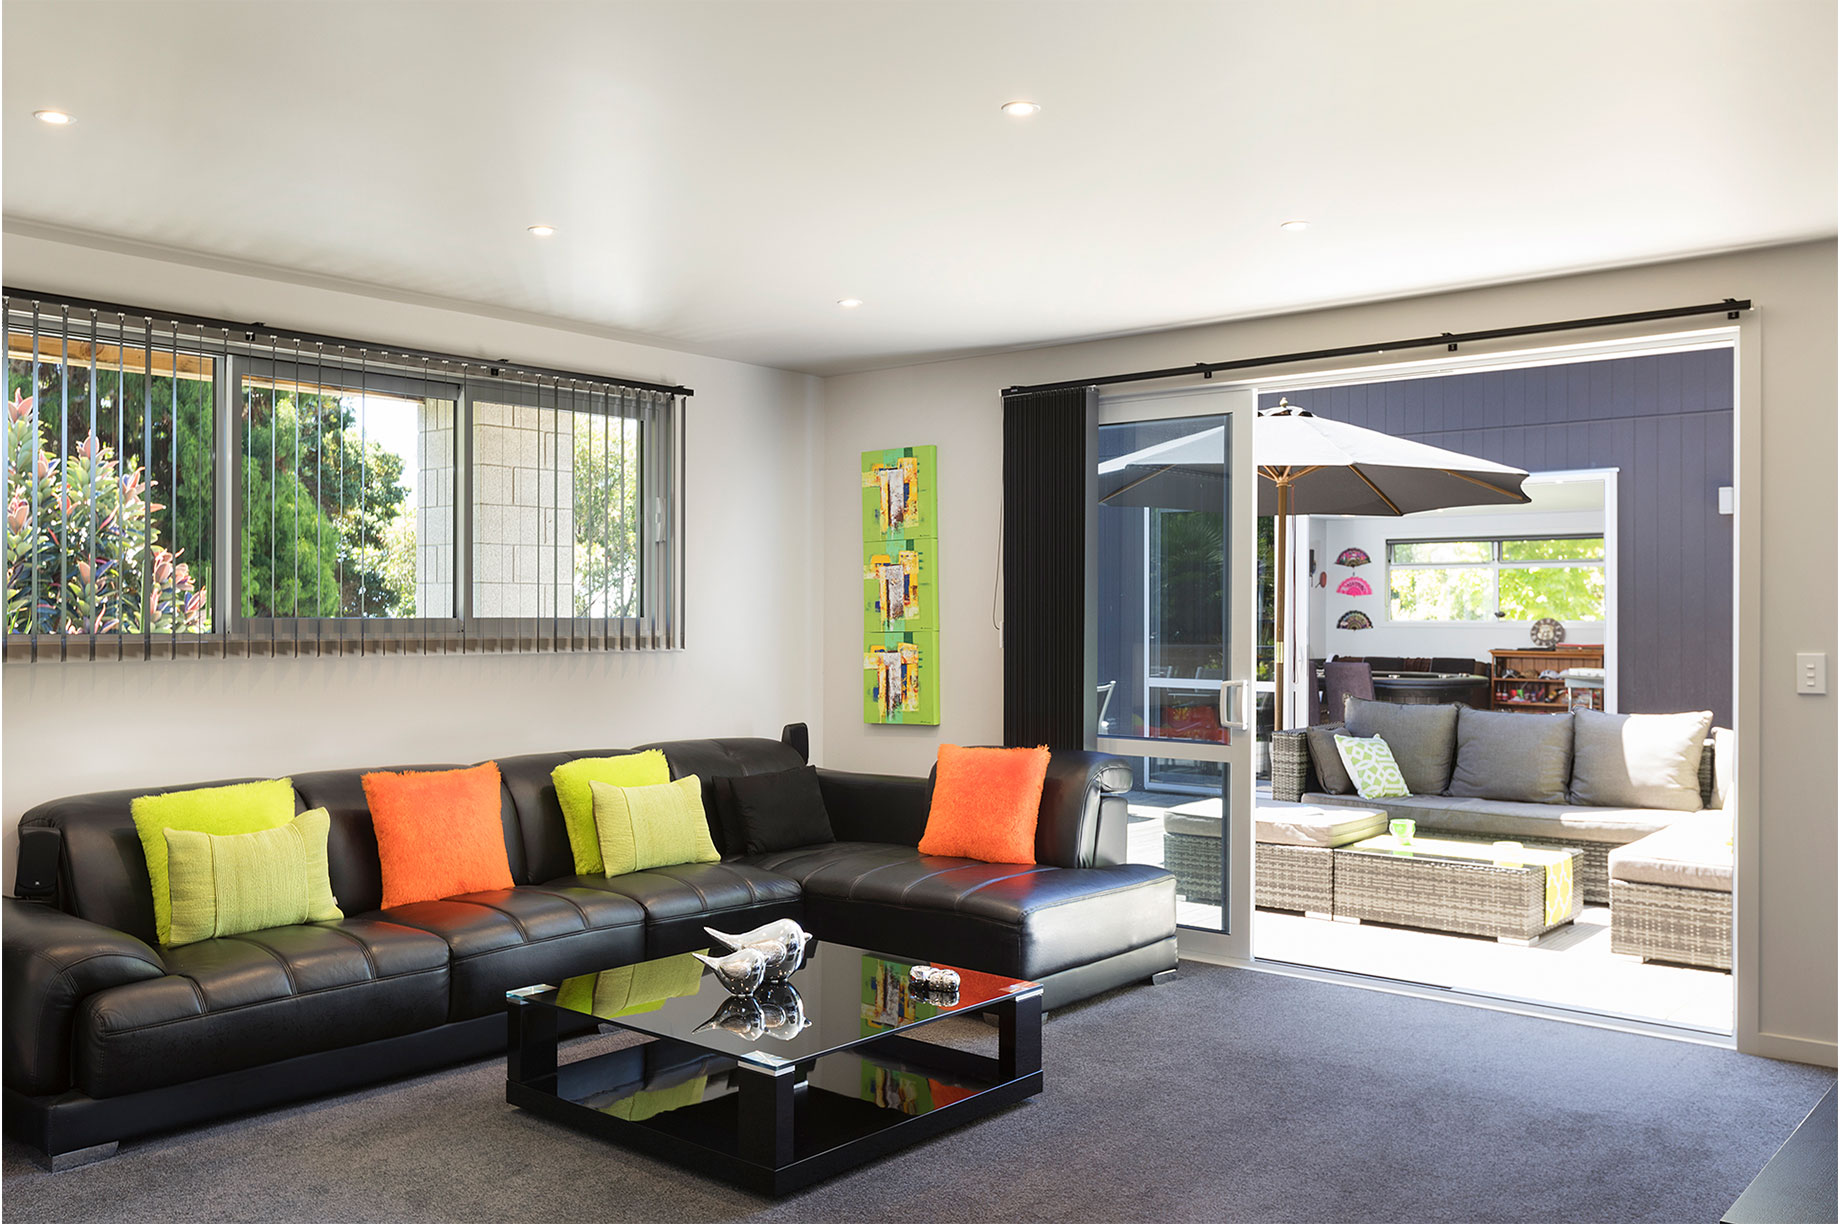 Lounge interior with a black leather couch and colourful pillows